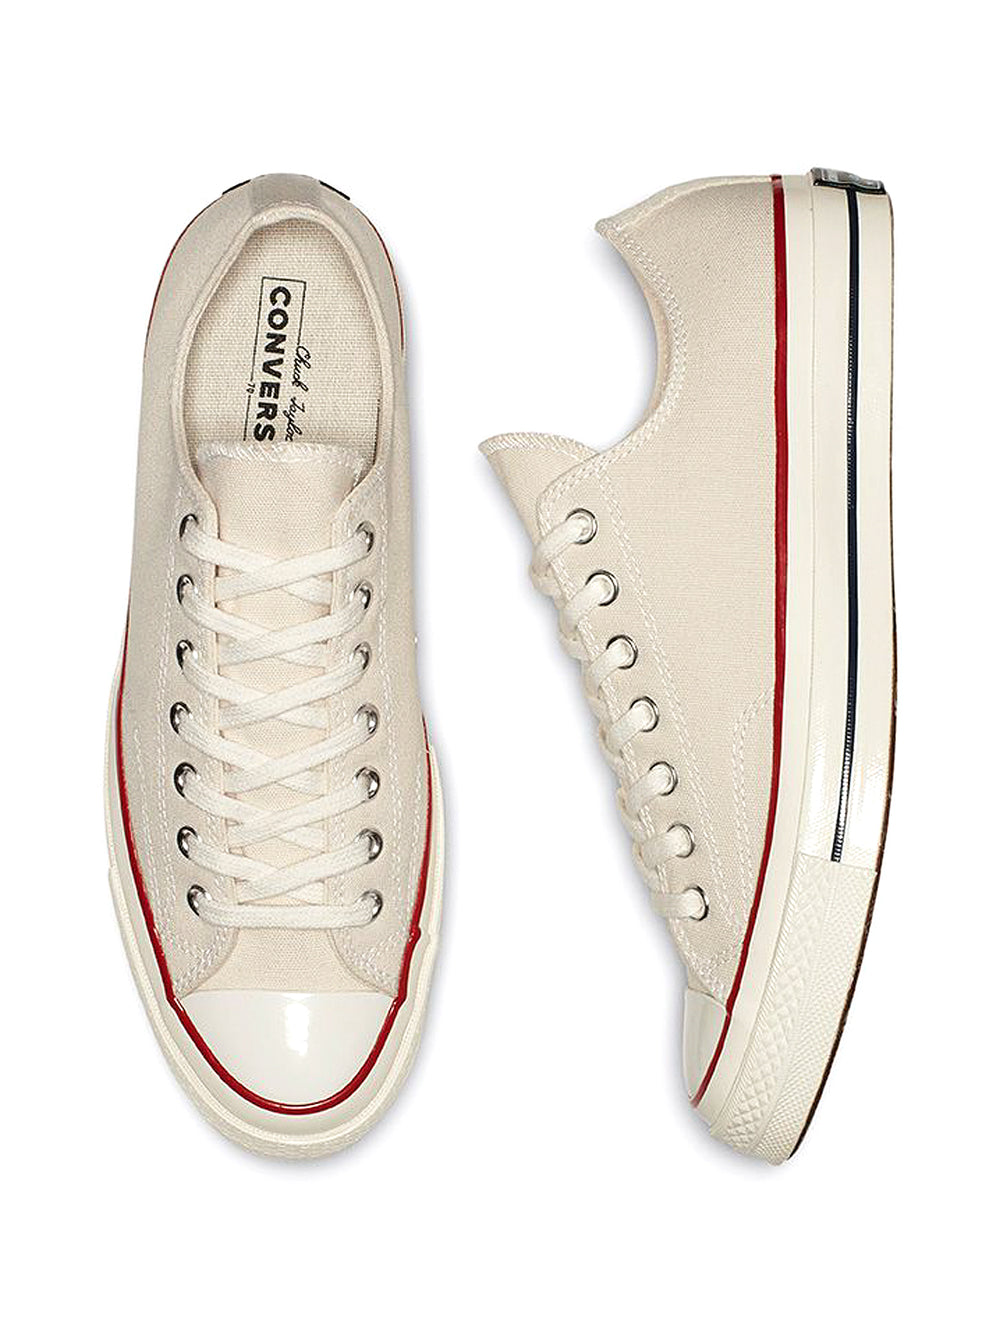 WOMENS CONVERSE CHUCK 70 E OX CANVAS SNEAKERS - CLEARANCE